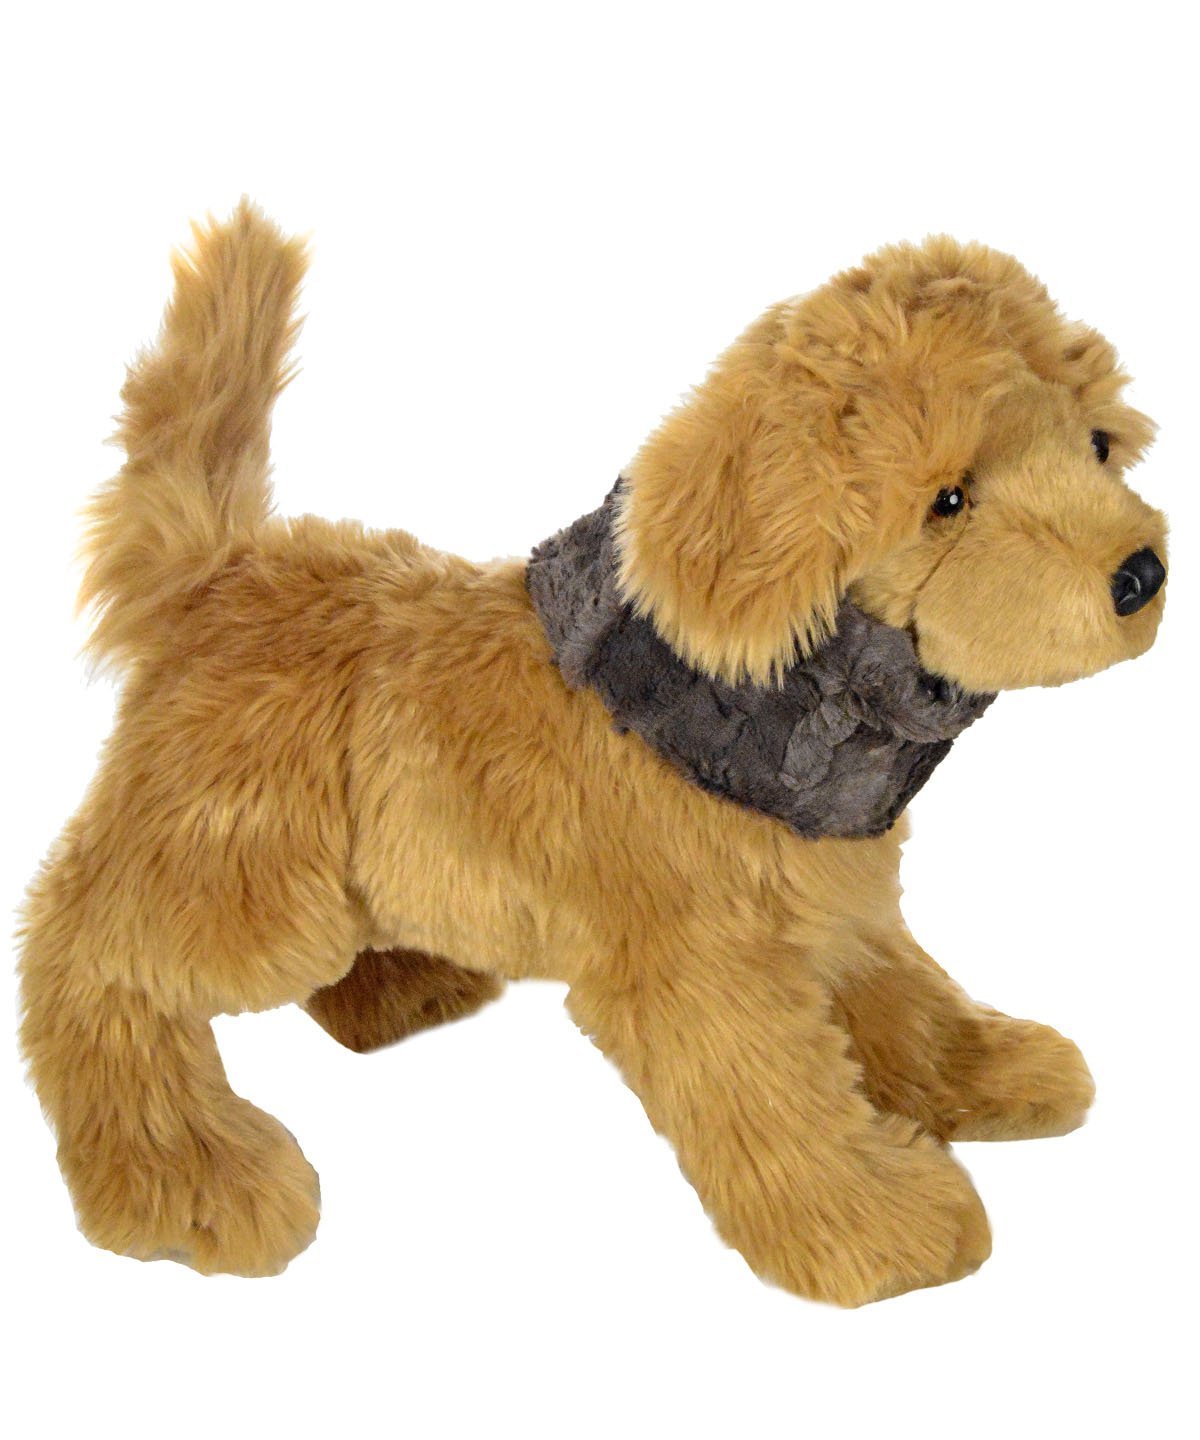 Doggie Ruff - Cuddly Faux Furs (SOLD OUT)